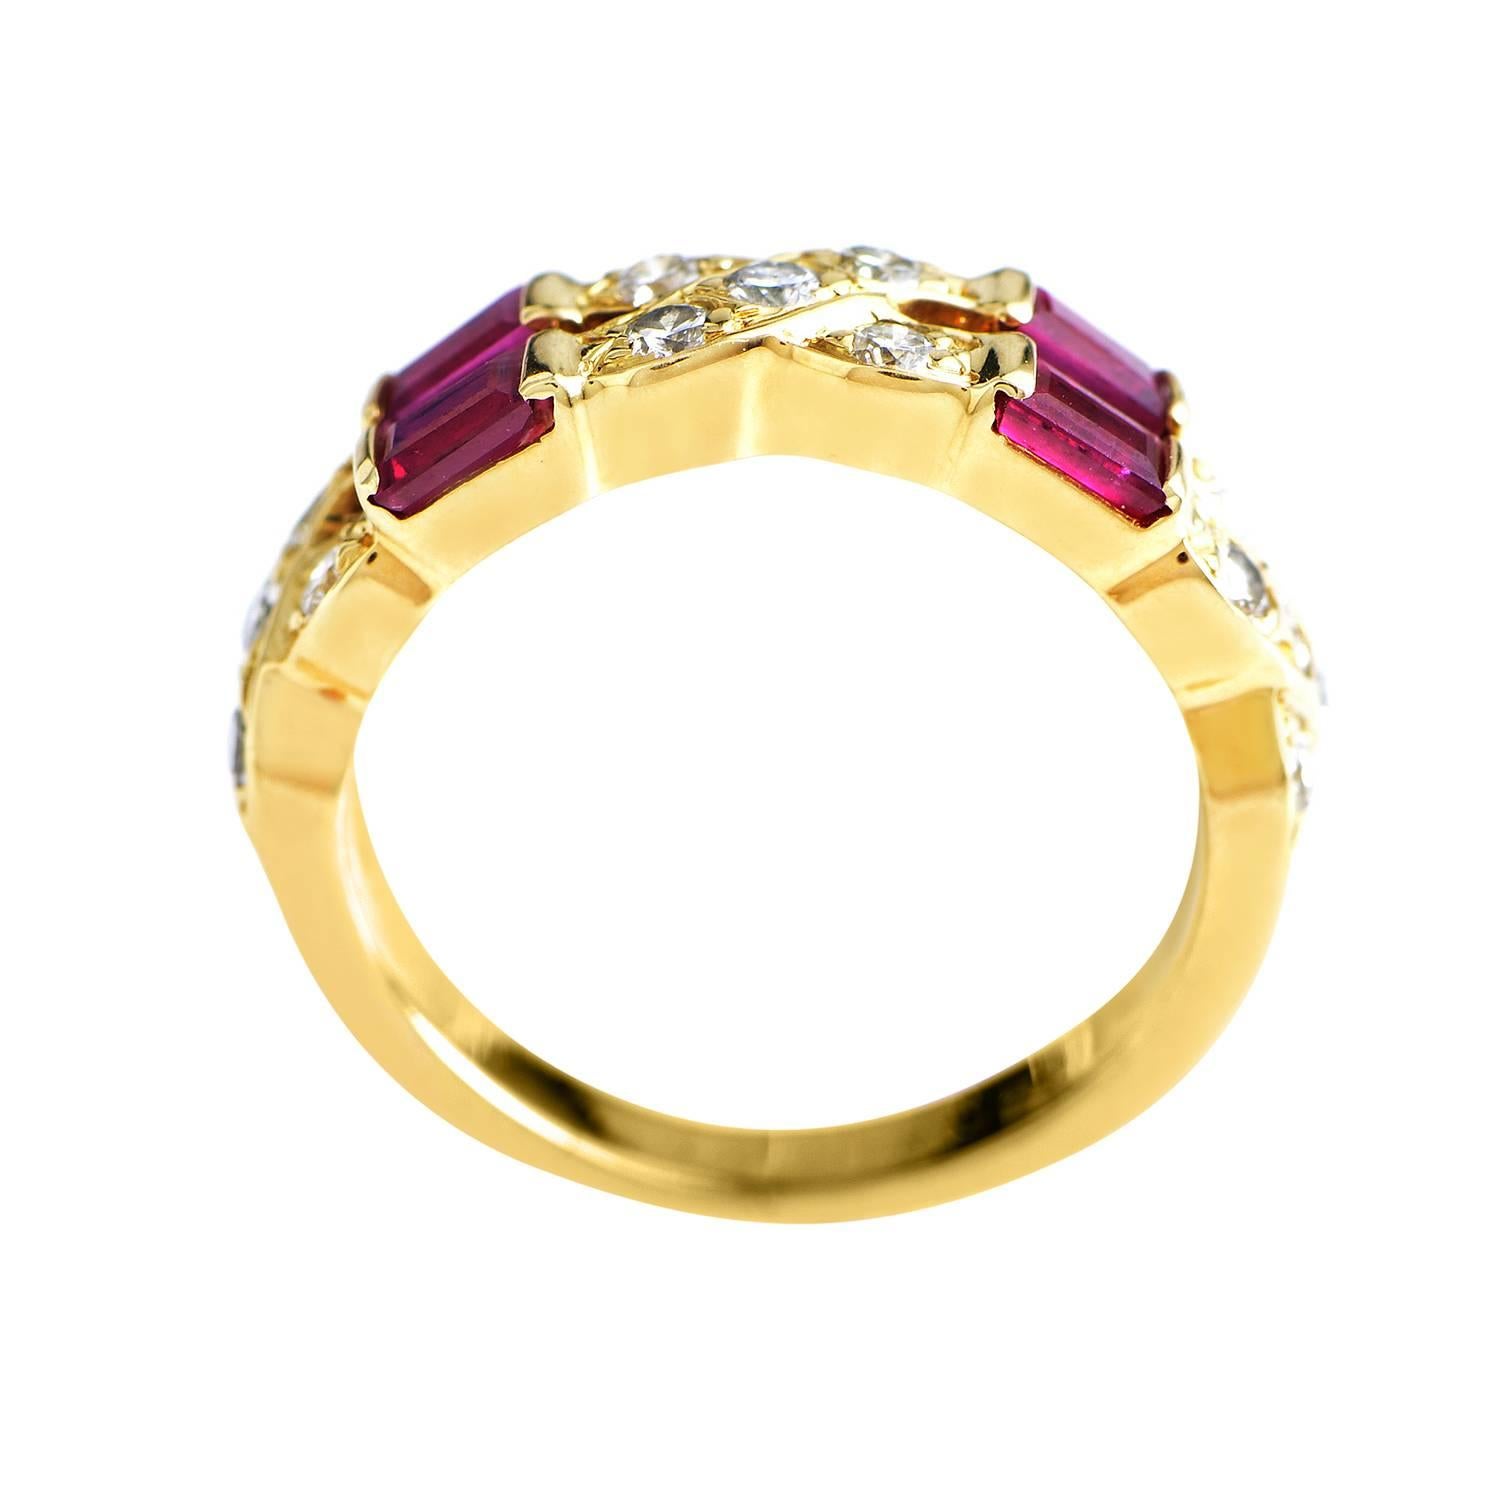 This Tiffany & Co. diamond and ruby ring is glamorous and eye catching. The 18K yellow gold ring boasts a split shank that intertwines in the front, presenting and intriguing base for the ~.35ct of diamonds that dazzle from the v-prong settings that